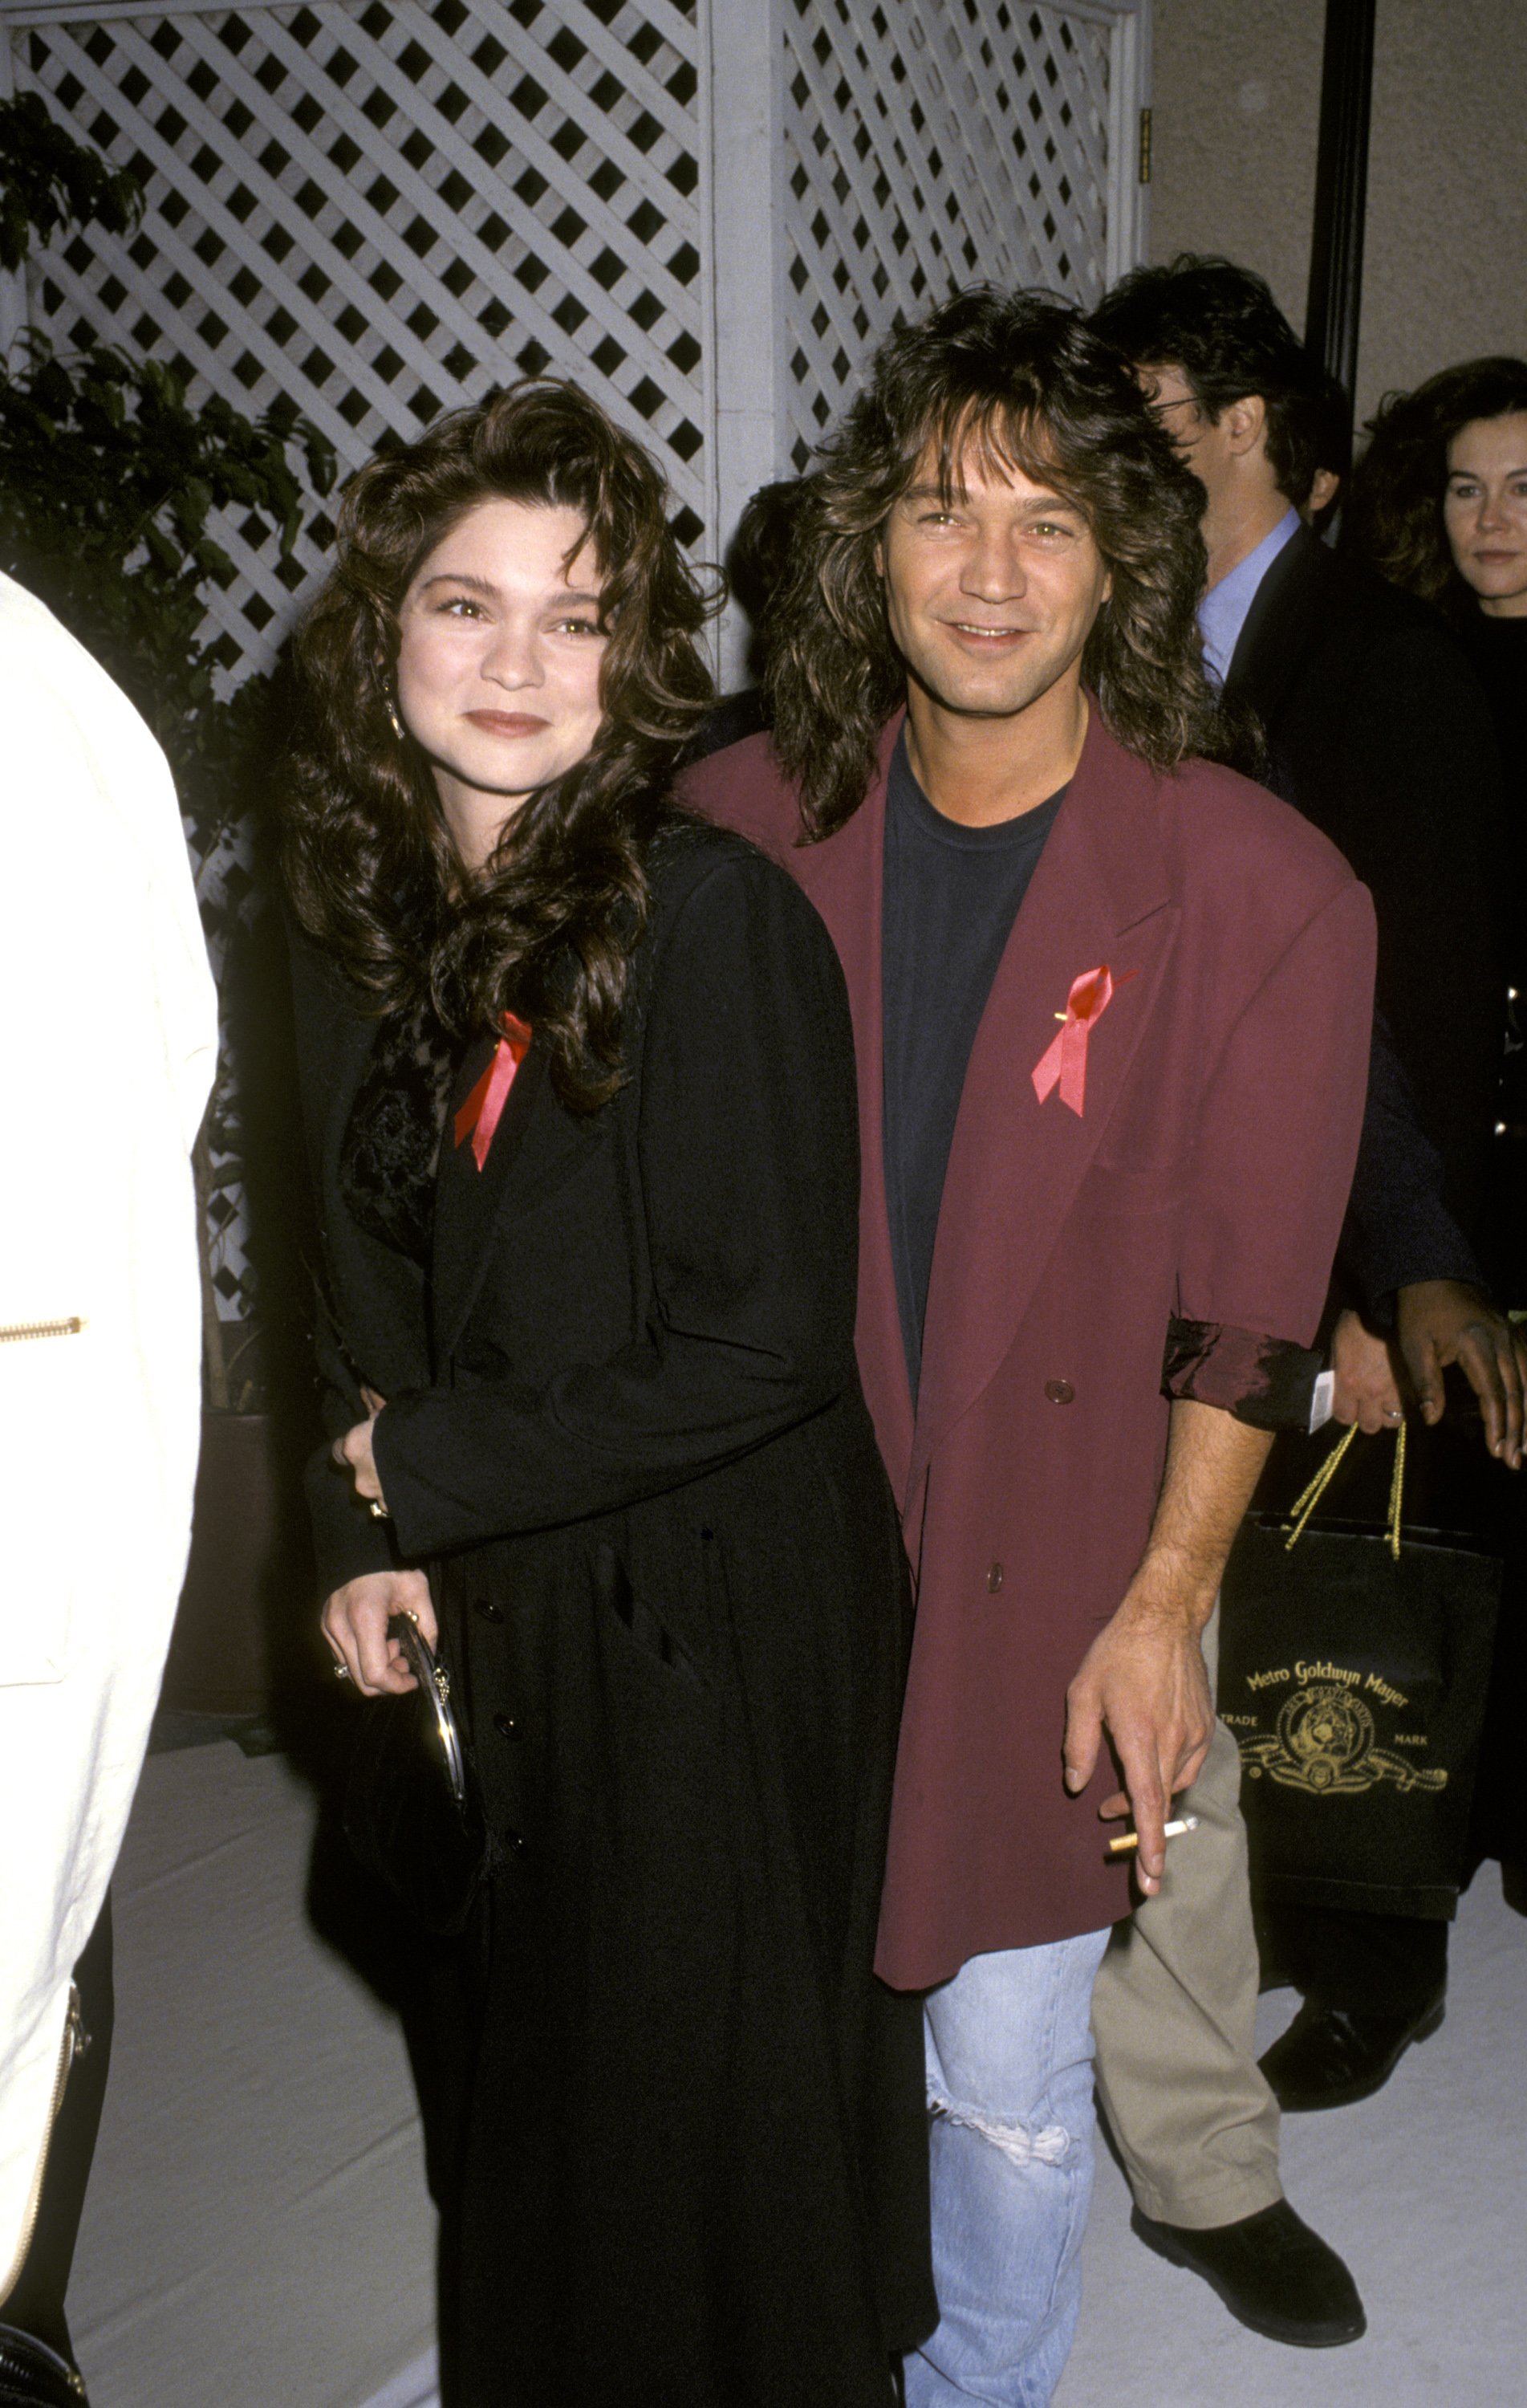  Valerie Bertinelli and Eddie Van Halen attend the APLA 6th Commitment to Life Concert Benefit at Universal Amphitheater in Universal City, California, on November 18, 1992. | Source: Getty Images